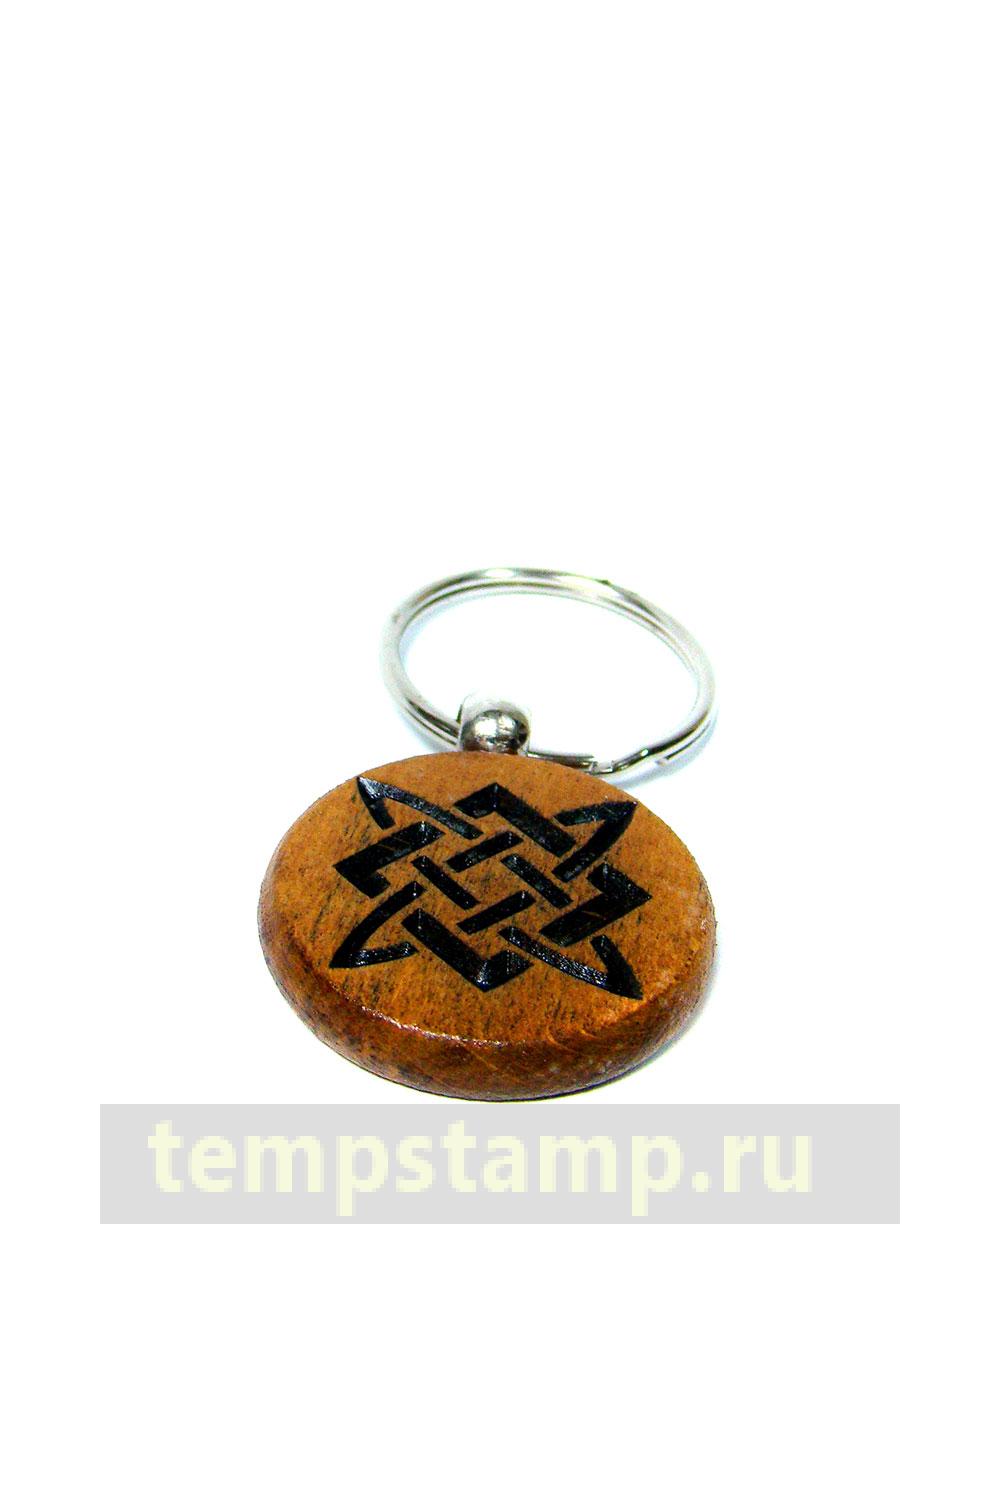 "Key ring with round trinket for laser engraving"